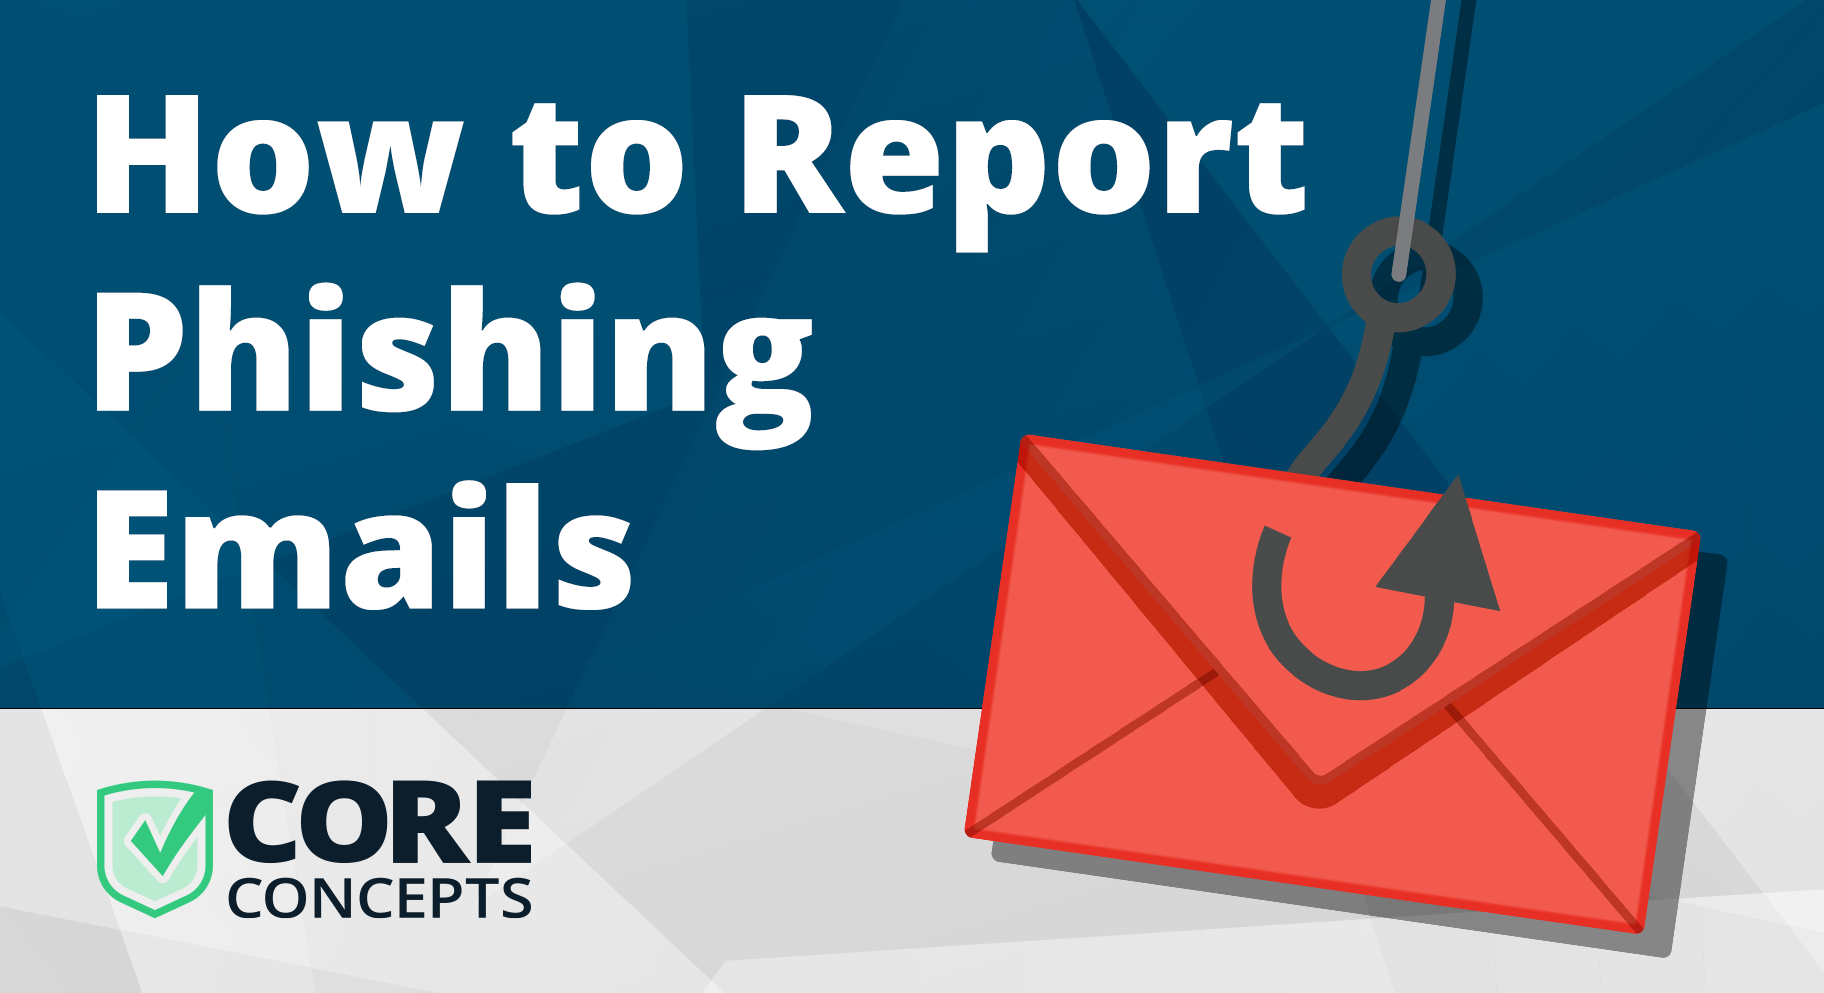 Core Concepts: How to Report Phishing Emails